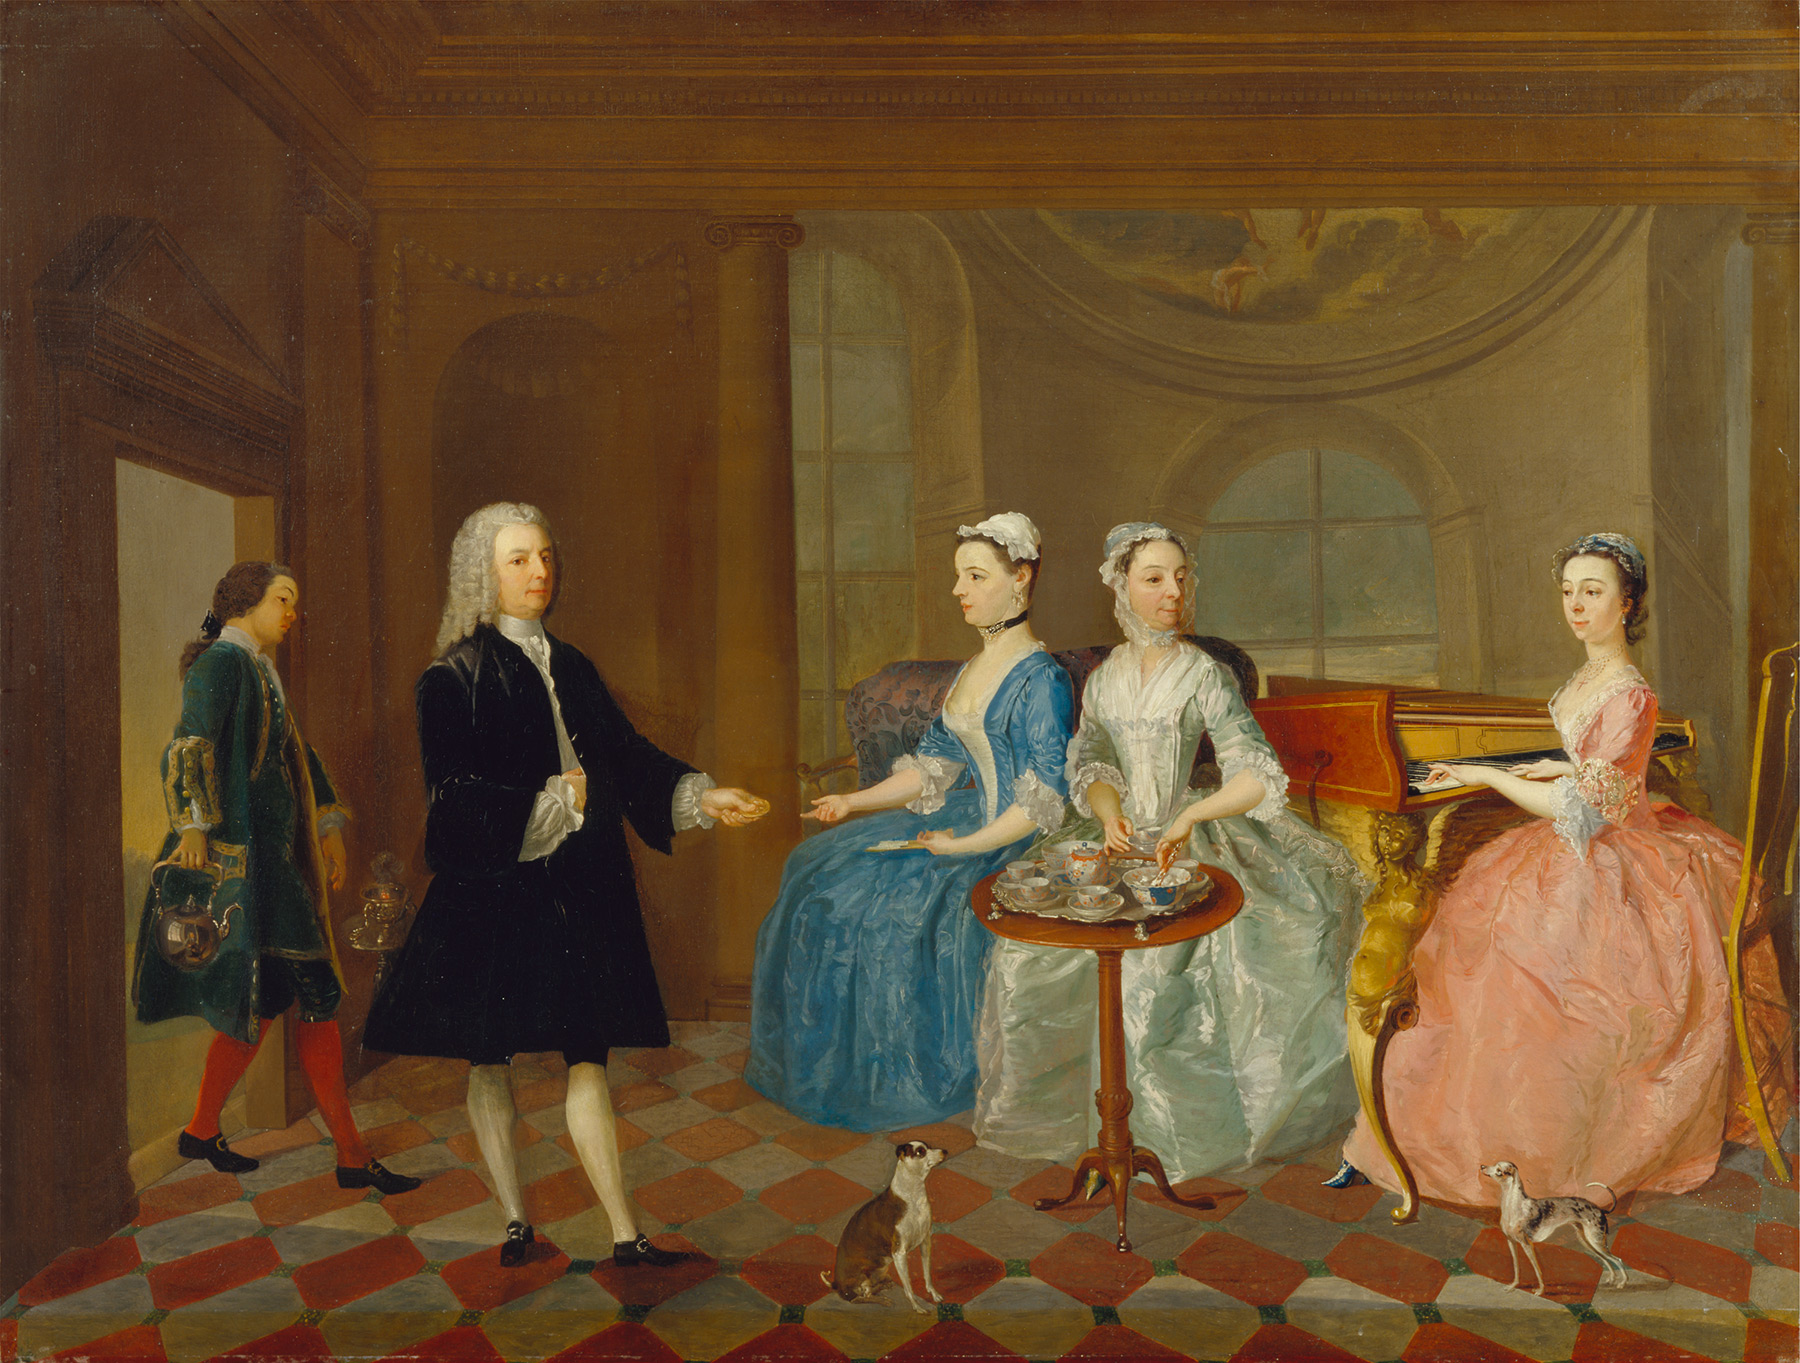 A Family Being Served with Tea, ca. 1745 by an unknown artist